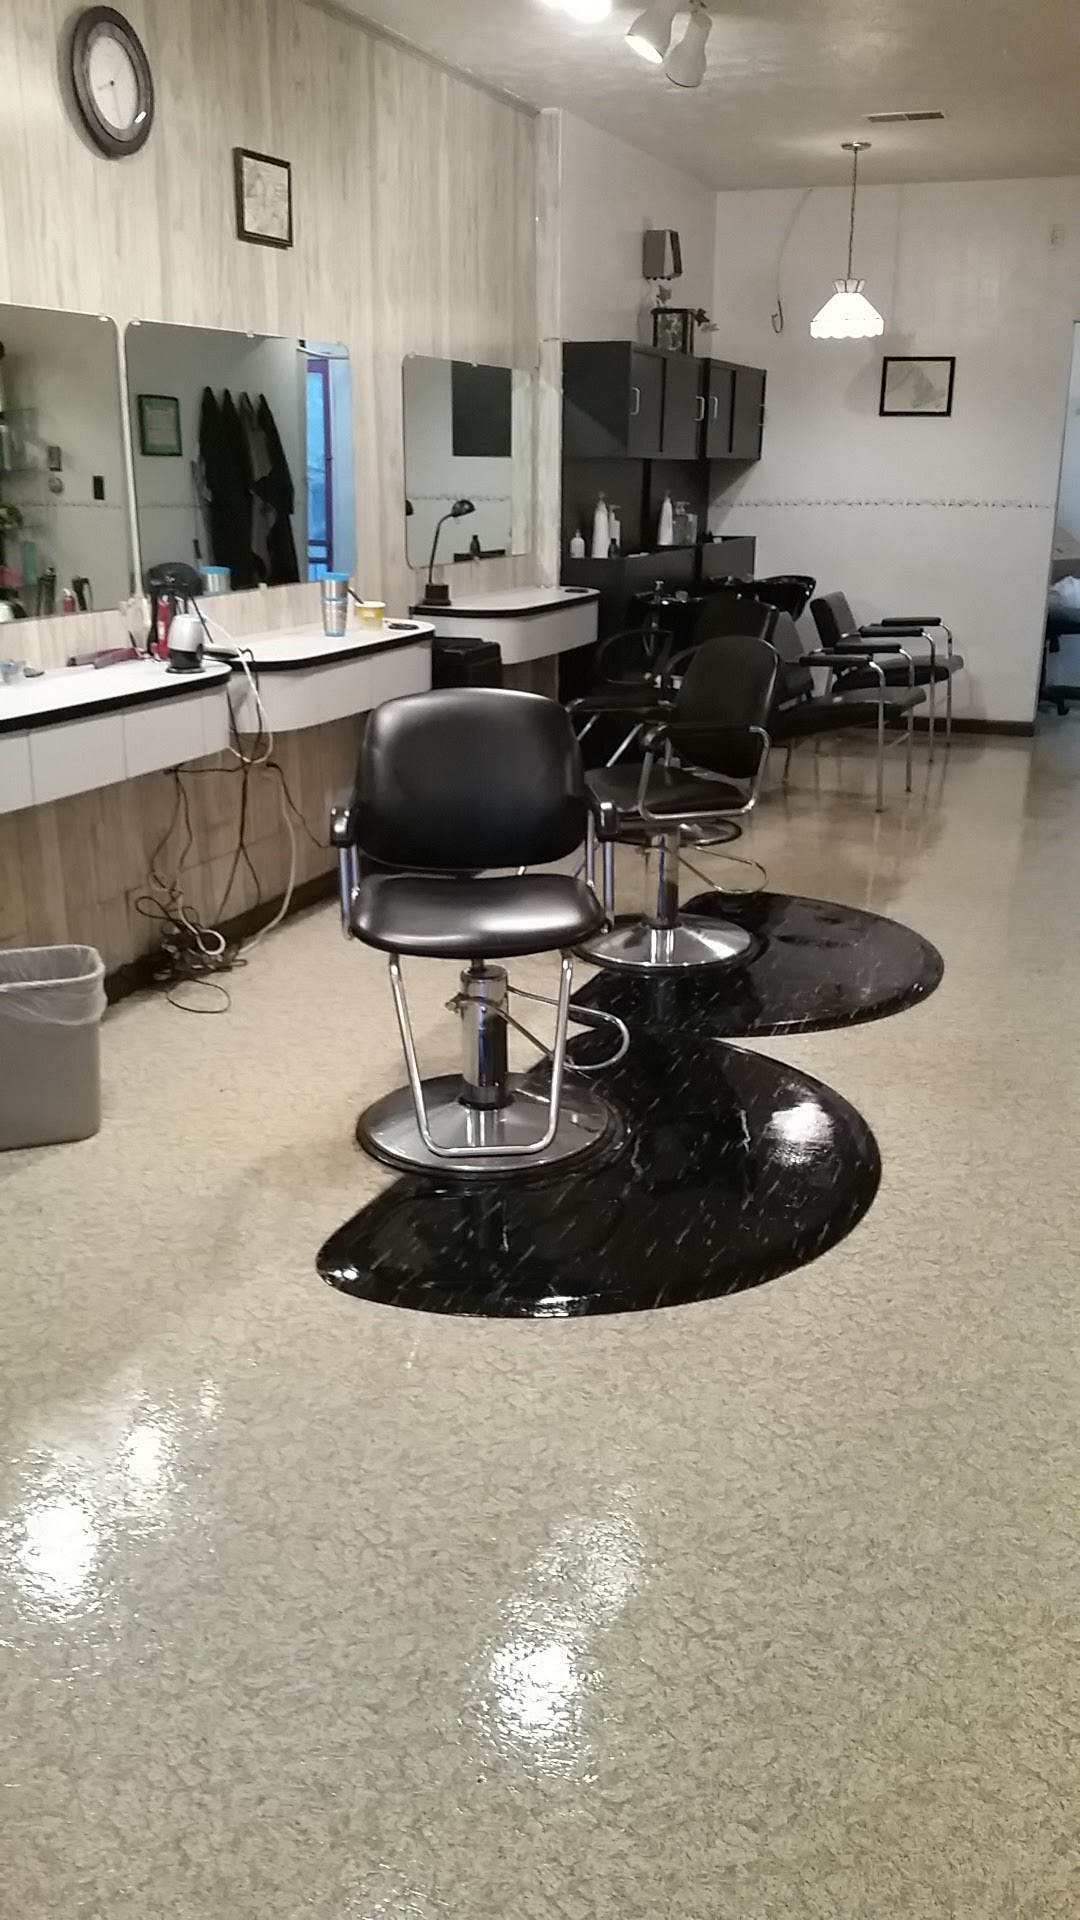 New Image Hair Studio 9864 Youngstown - Pittsburgh Rd, New Middletown Ohio 44442